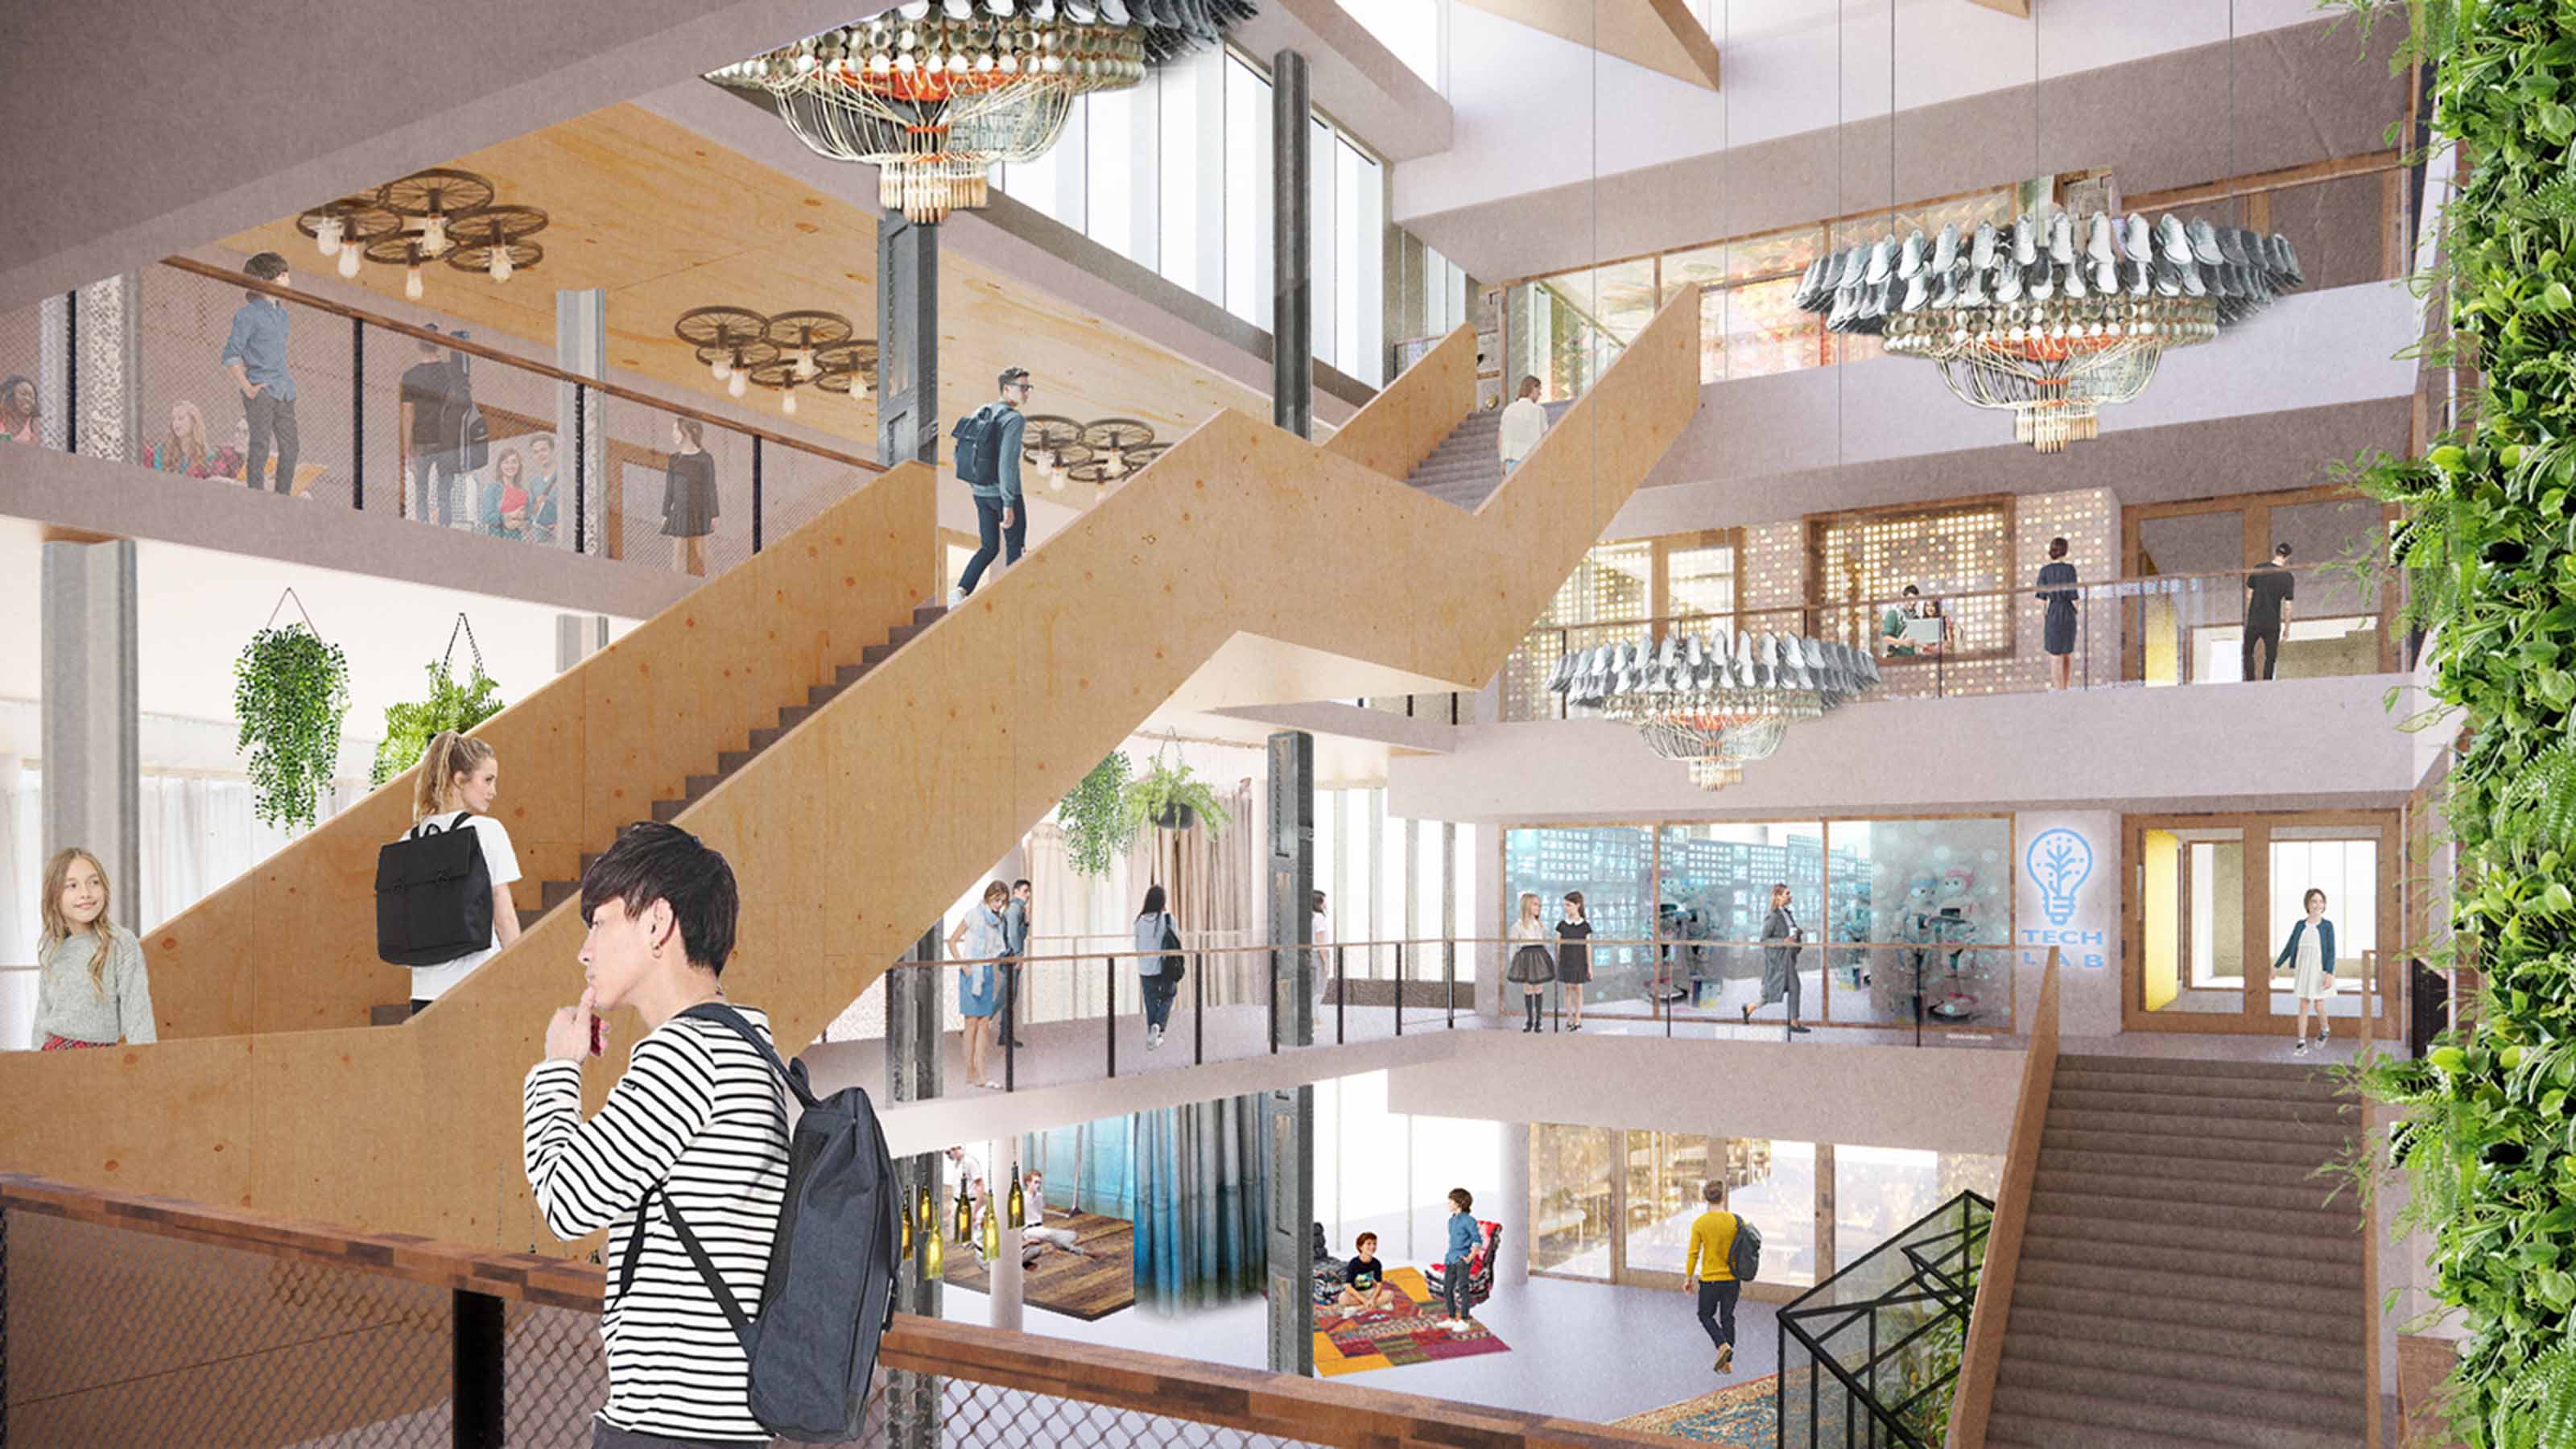 A central social route meanders through the building, connecting practical teaching labs which display the innovative education to the school’s interior as well as its surroundings.